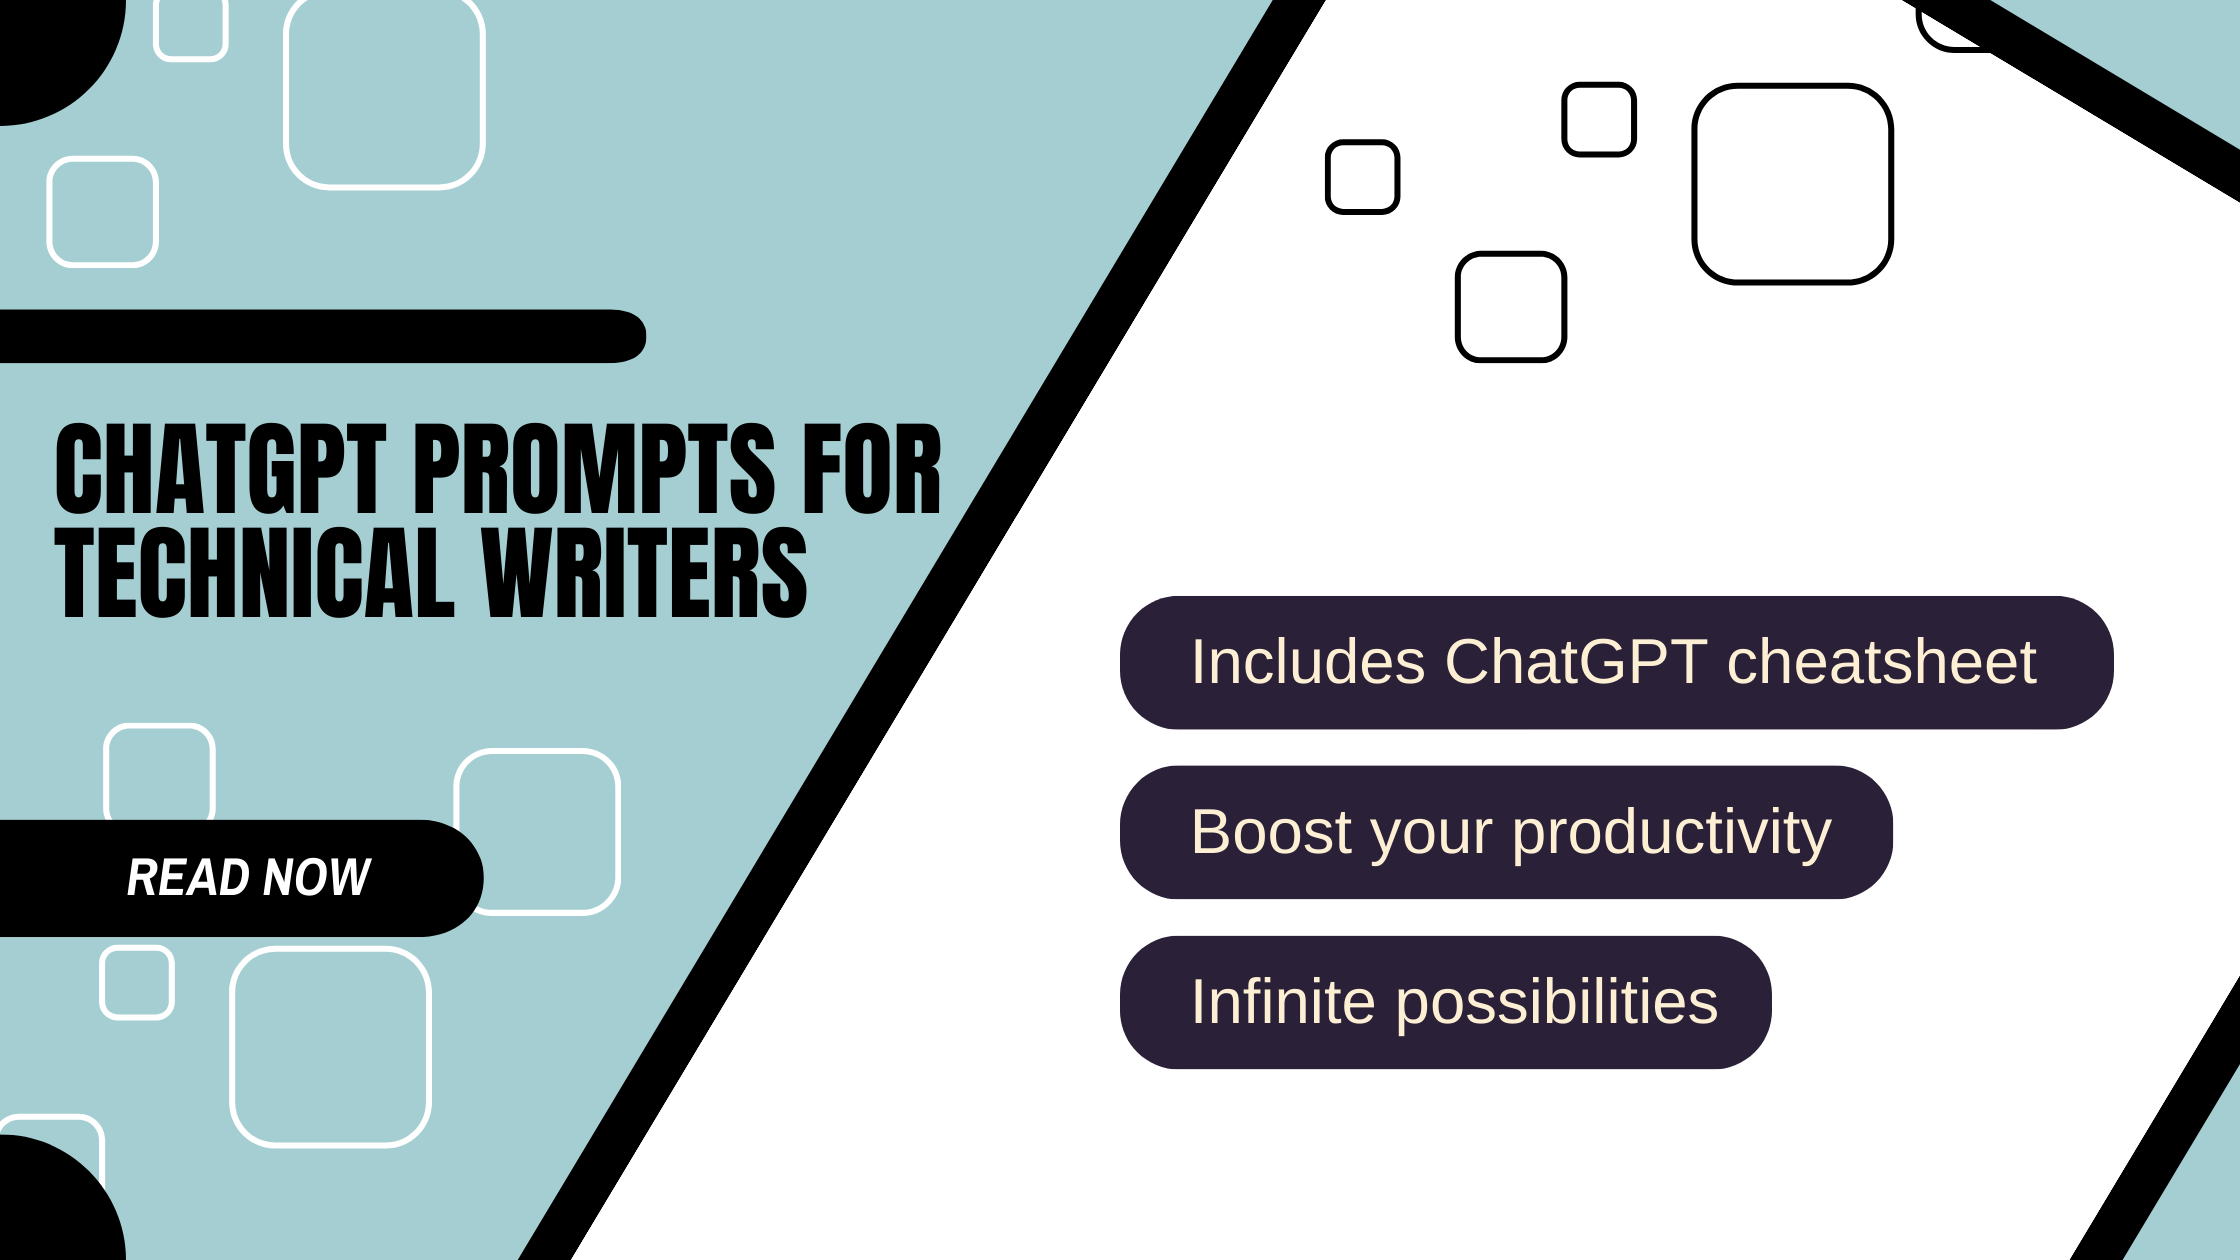 ChatGPT Prompts for Technical Writers - Boost Your Productivity and Creativity